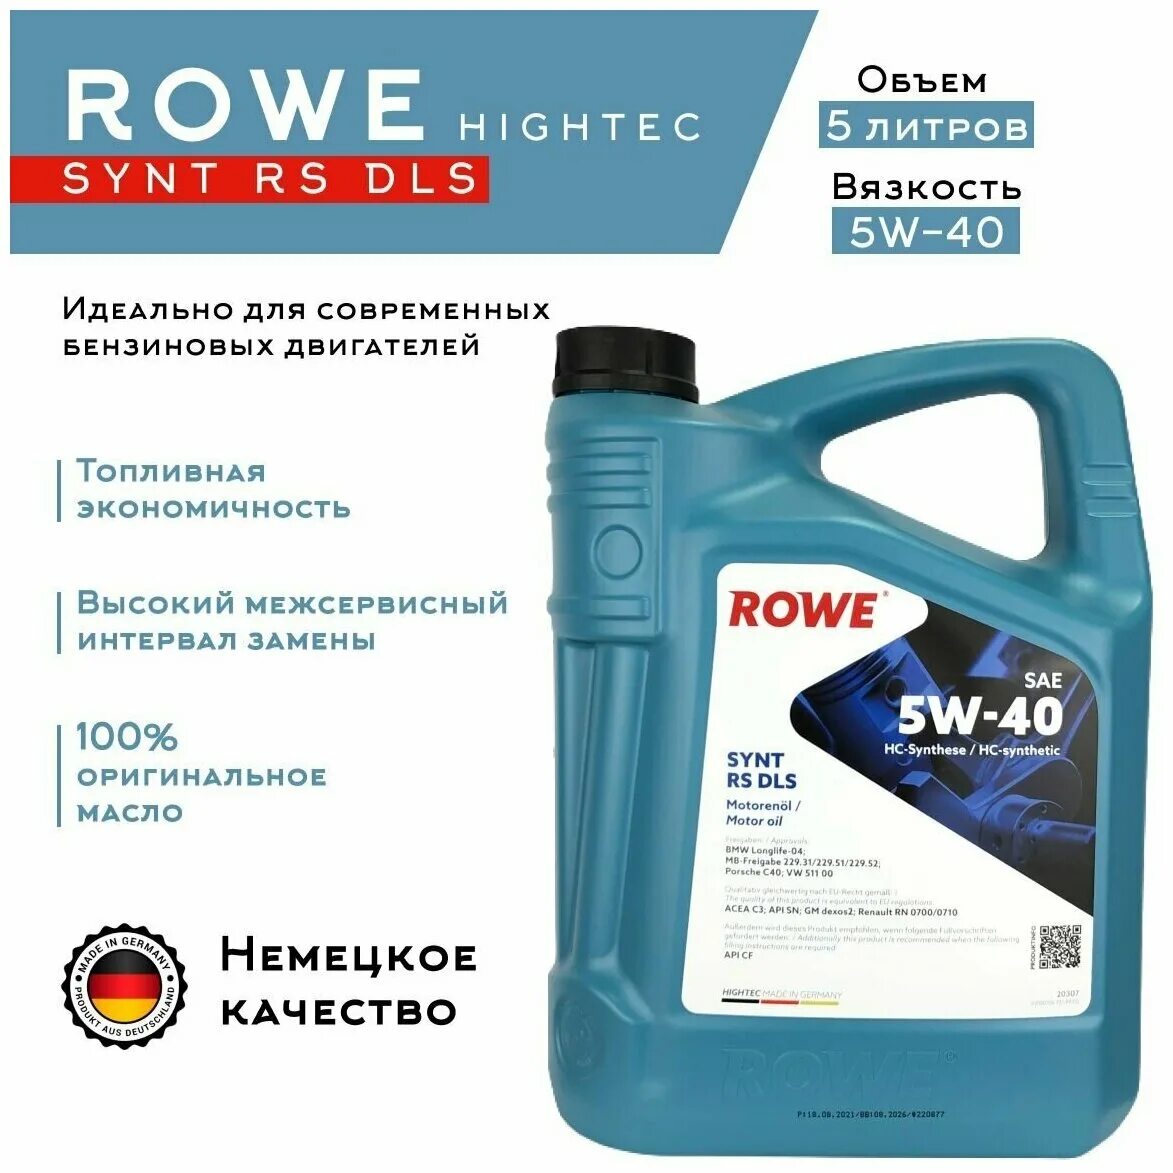 Rowe Hightec Synt RS d1 5w30. Hightec Synt RSI SAE 5w-40. Rowe 5/40 Hightec Synt RSI. Моторное масло Rowe 5w30.